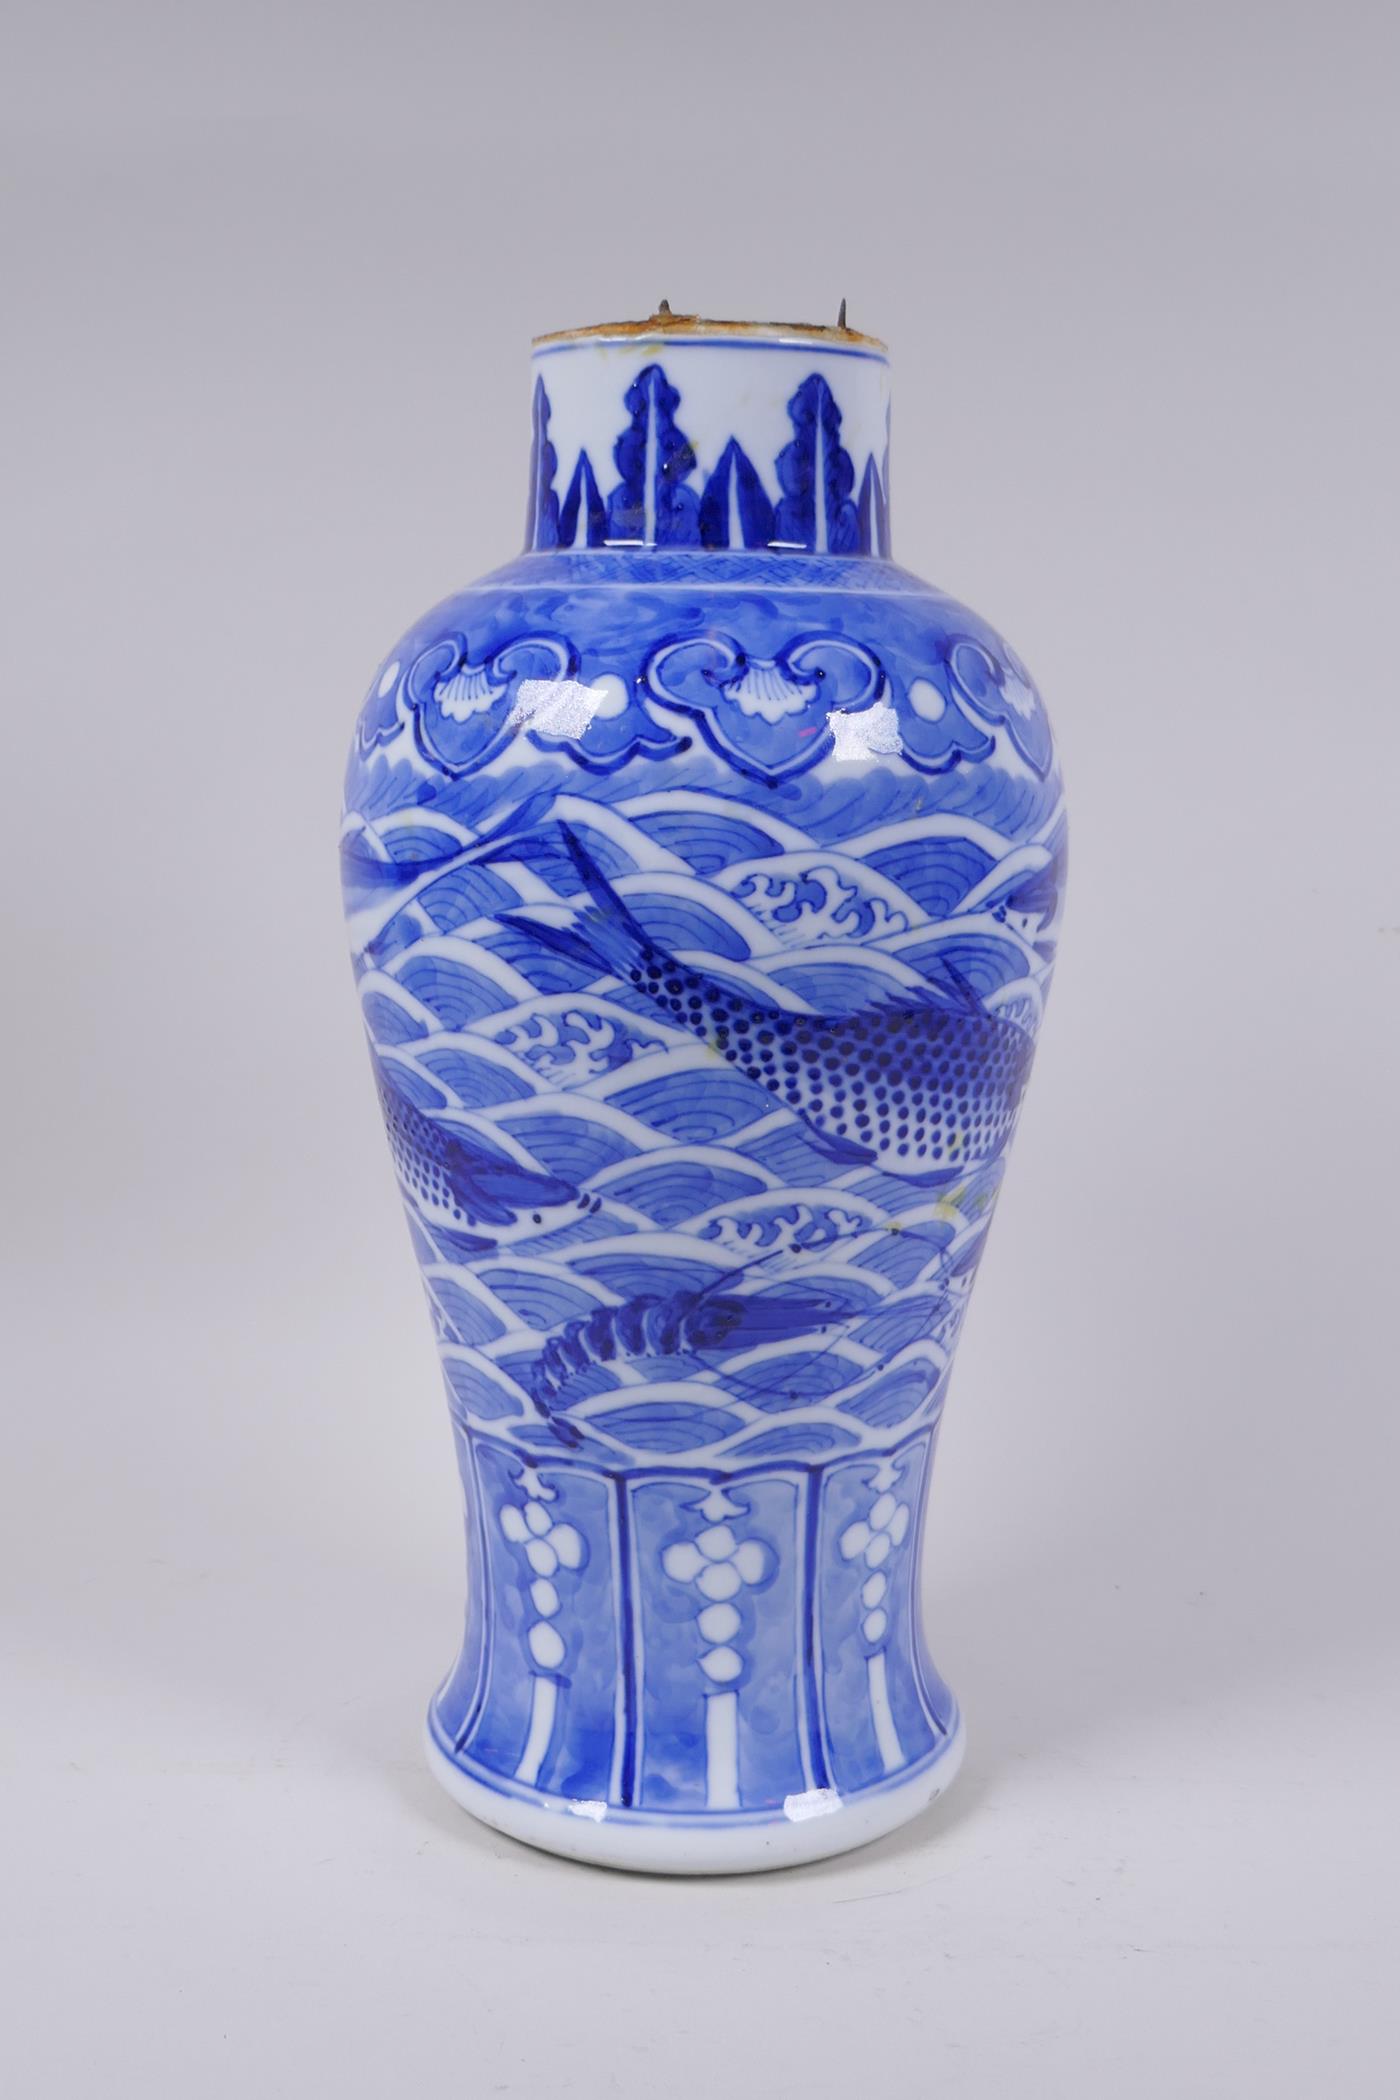 A C19th Chinese blue and white porcelain vase decorated with carp and crabs, Xuande 4 character mark - Image 5 of 9